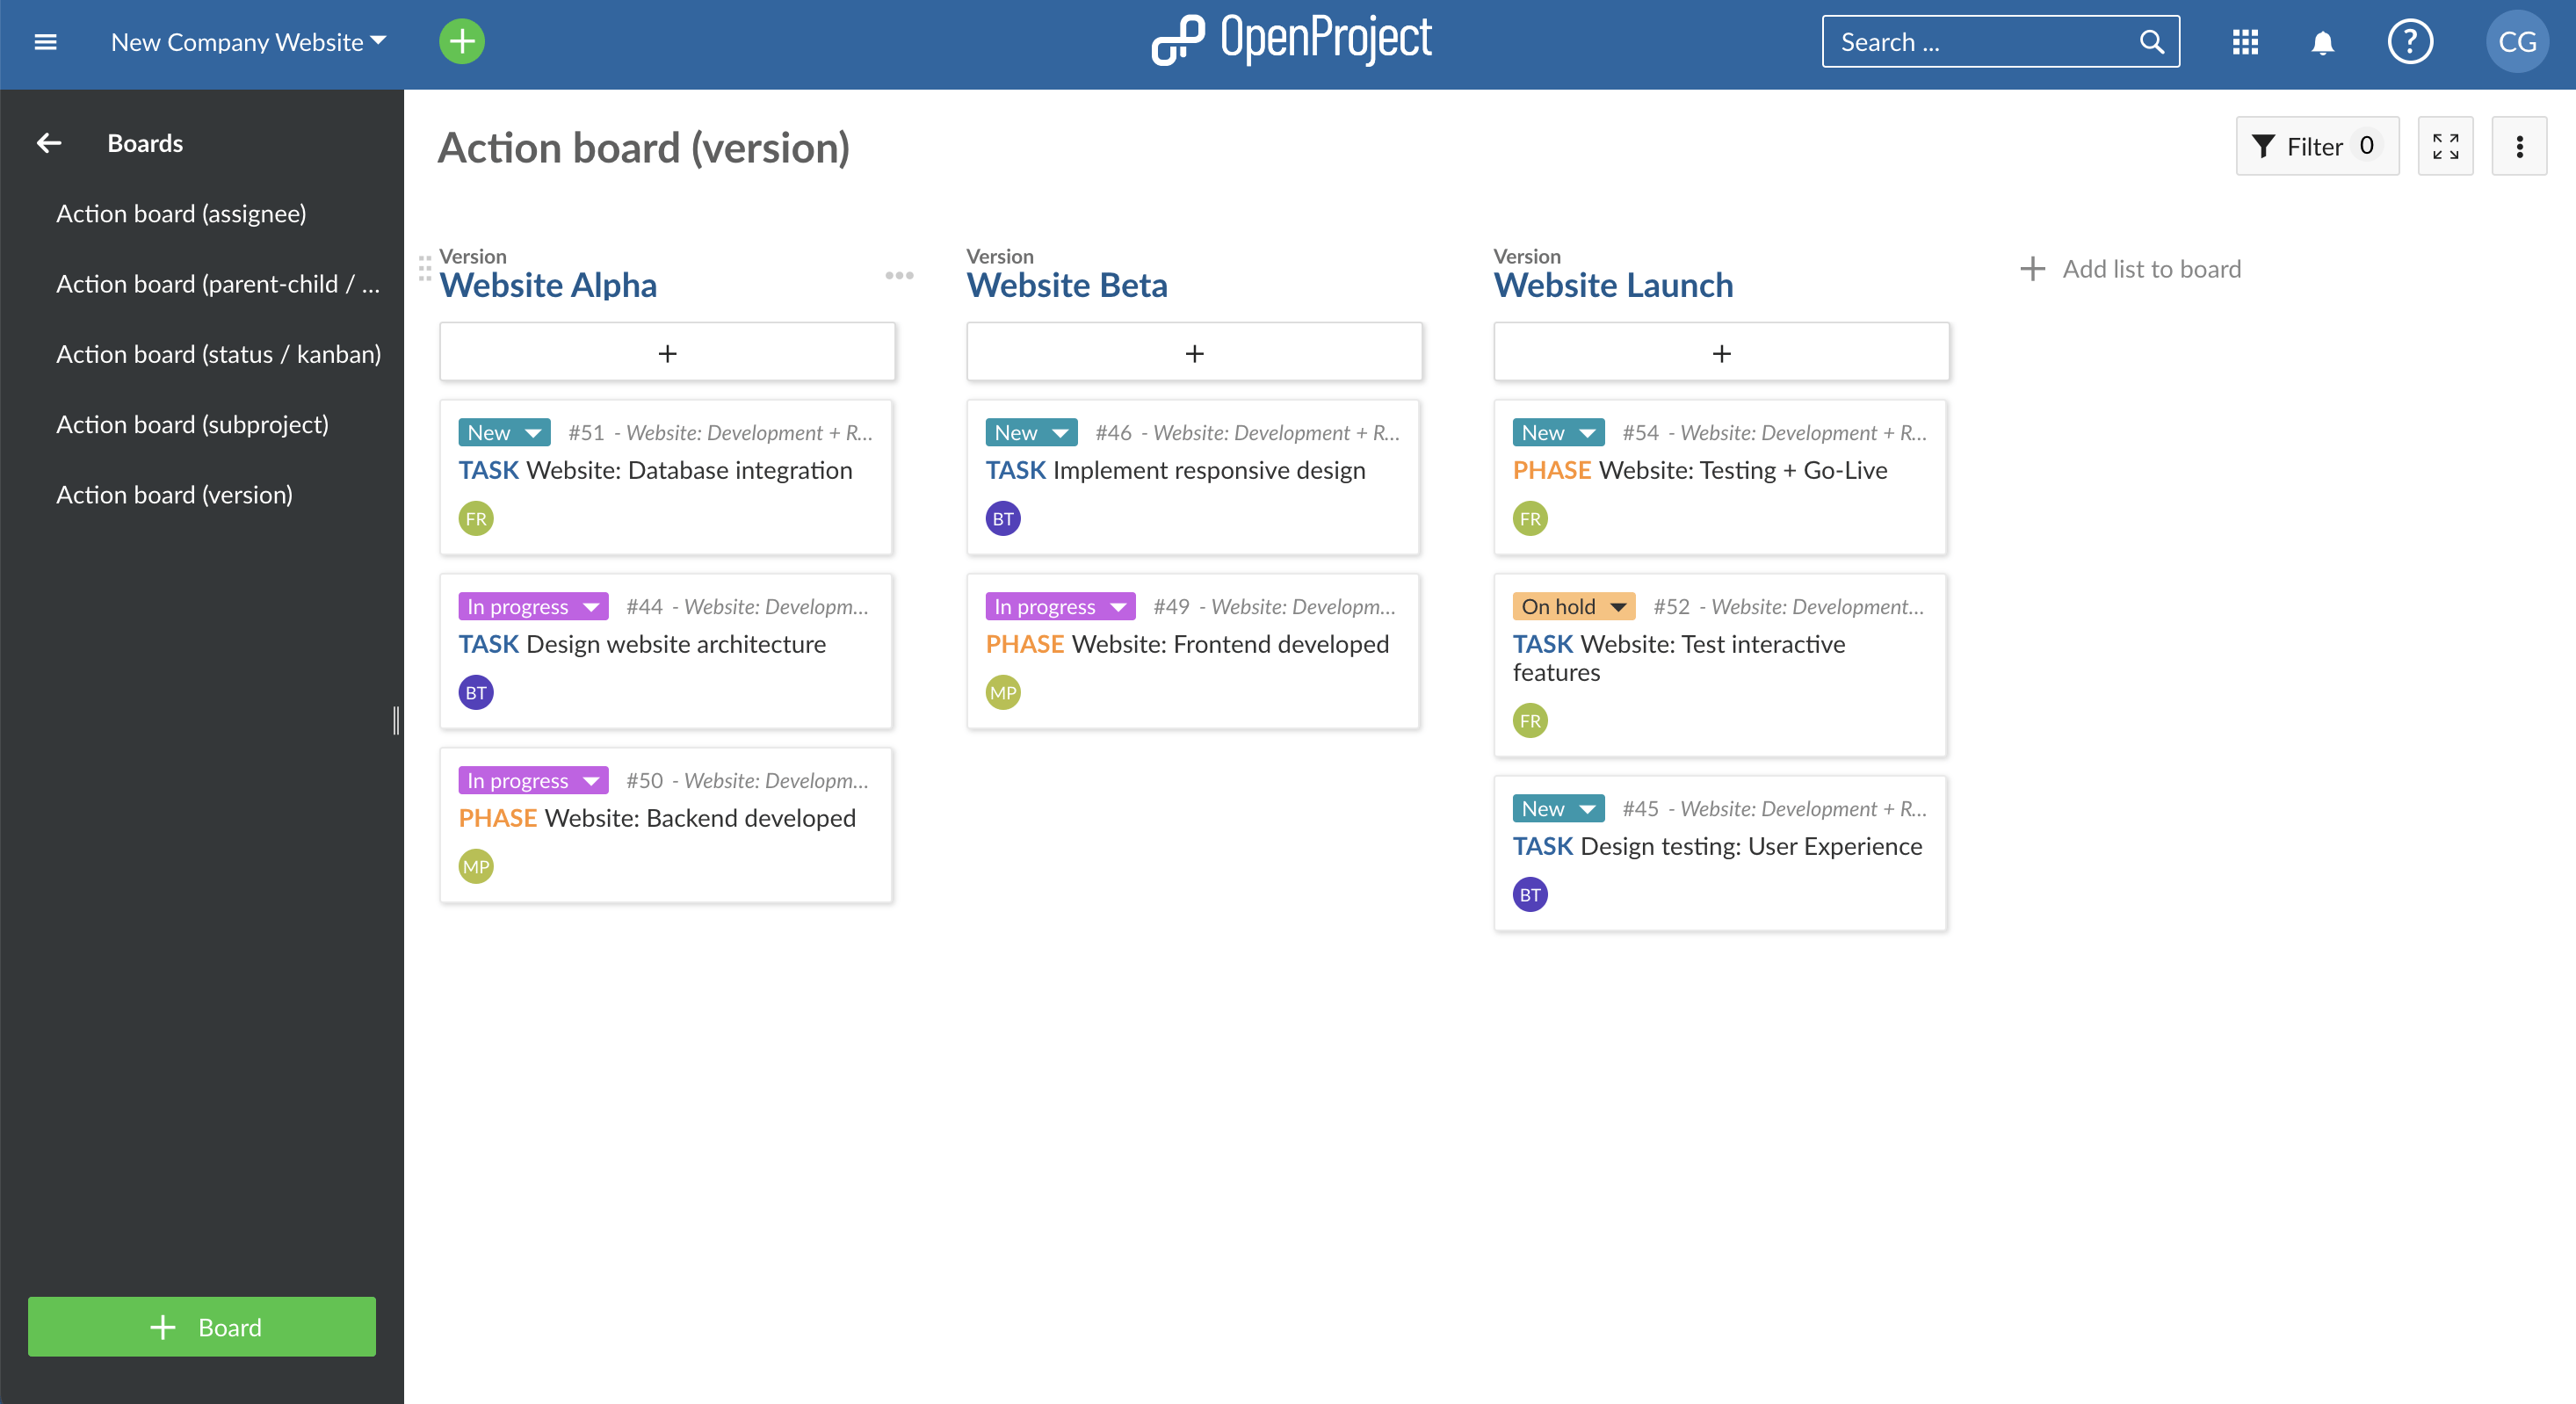 Agile Action Board of type Version